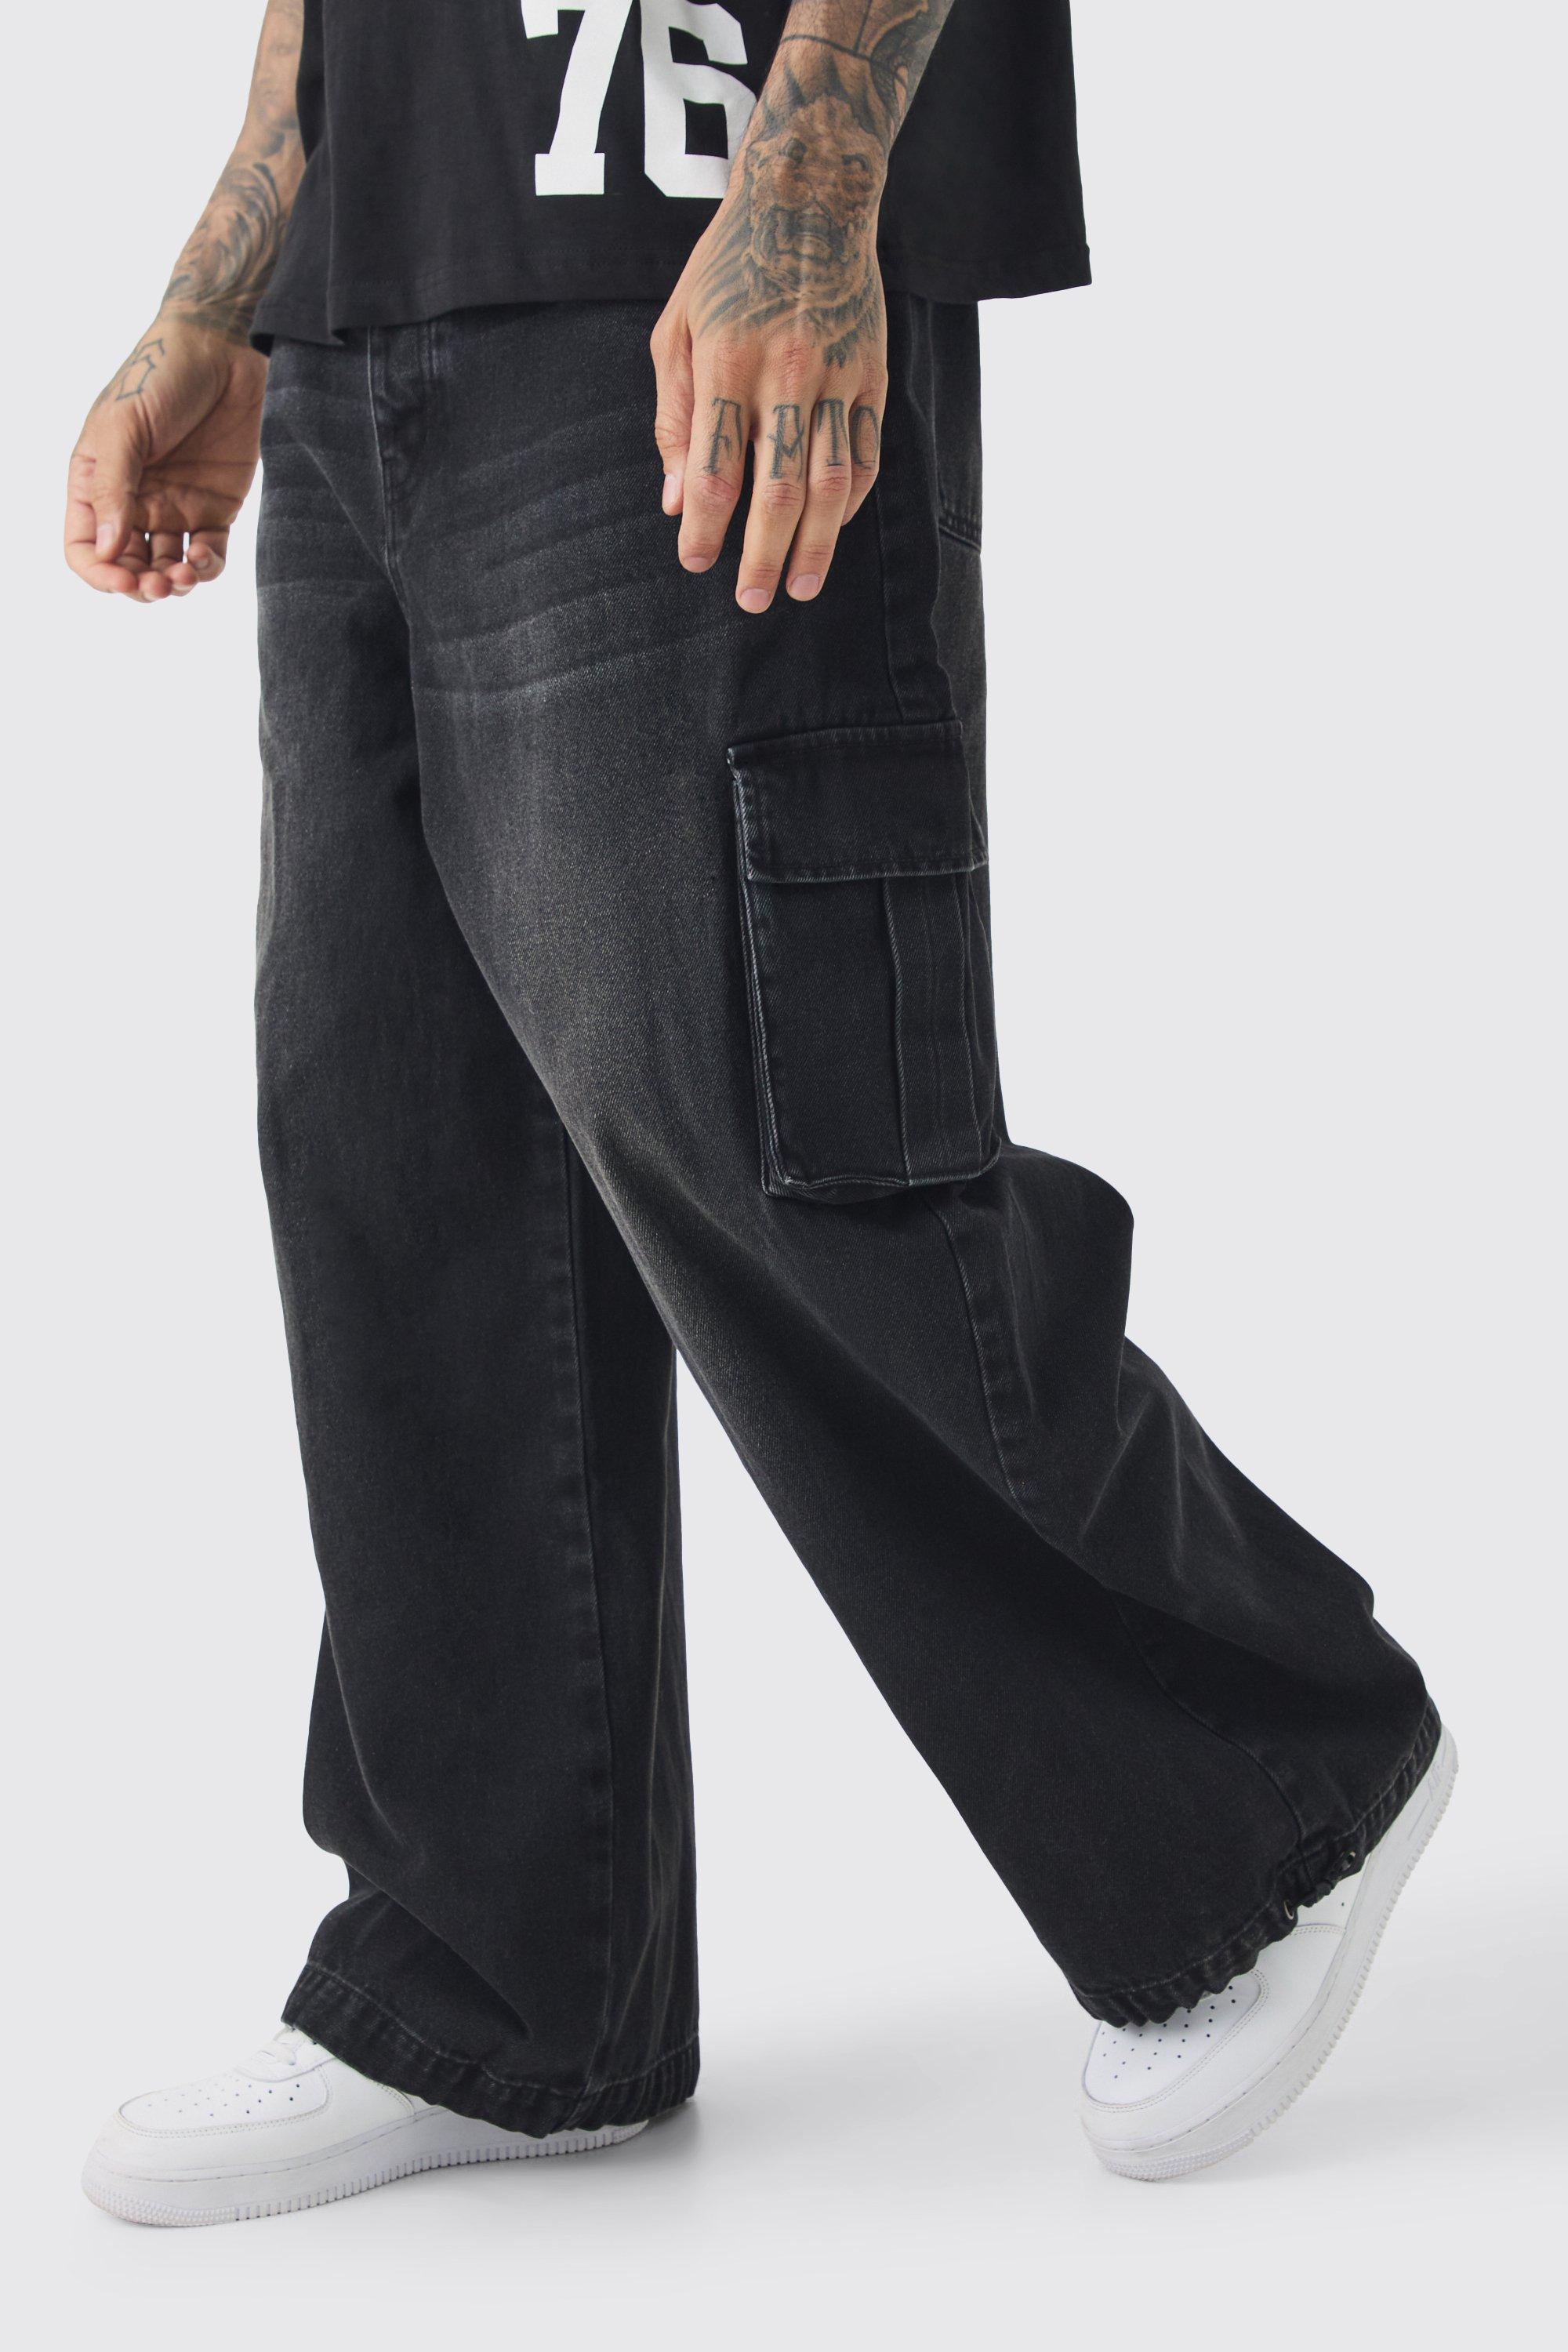 Boohoo Tall Cargo Parachute Jeans, Washed Black